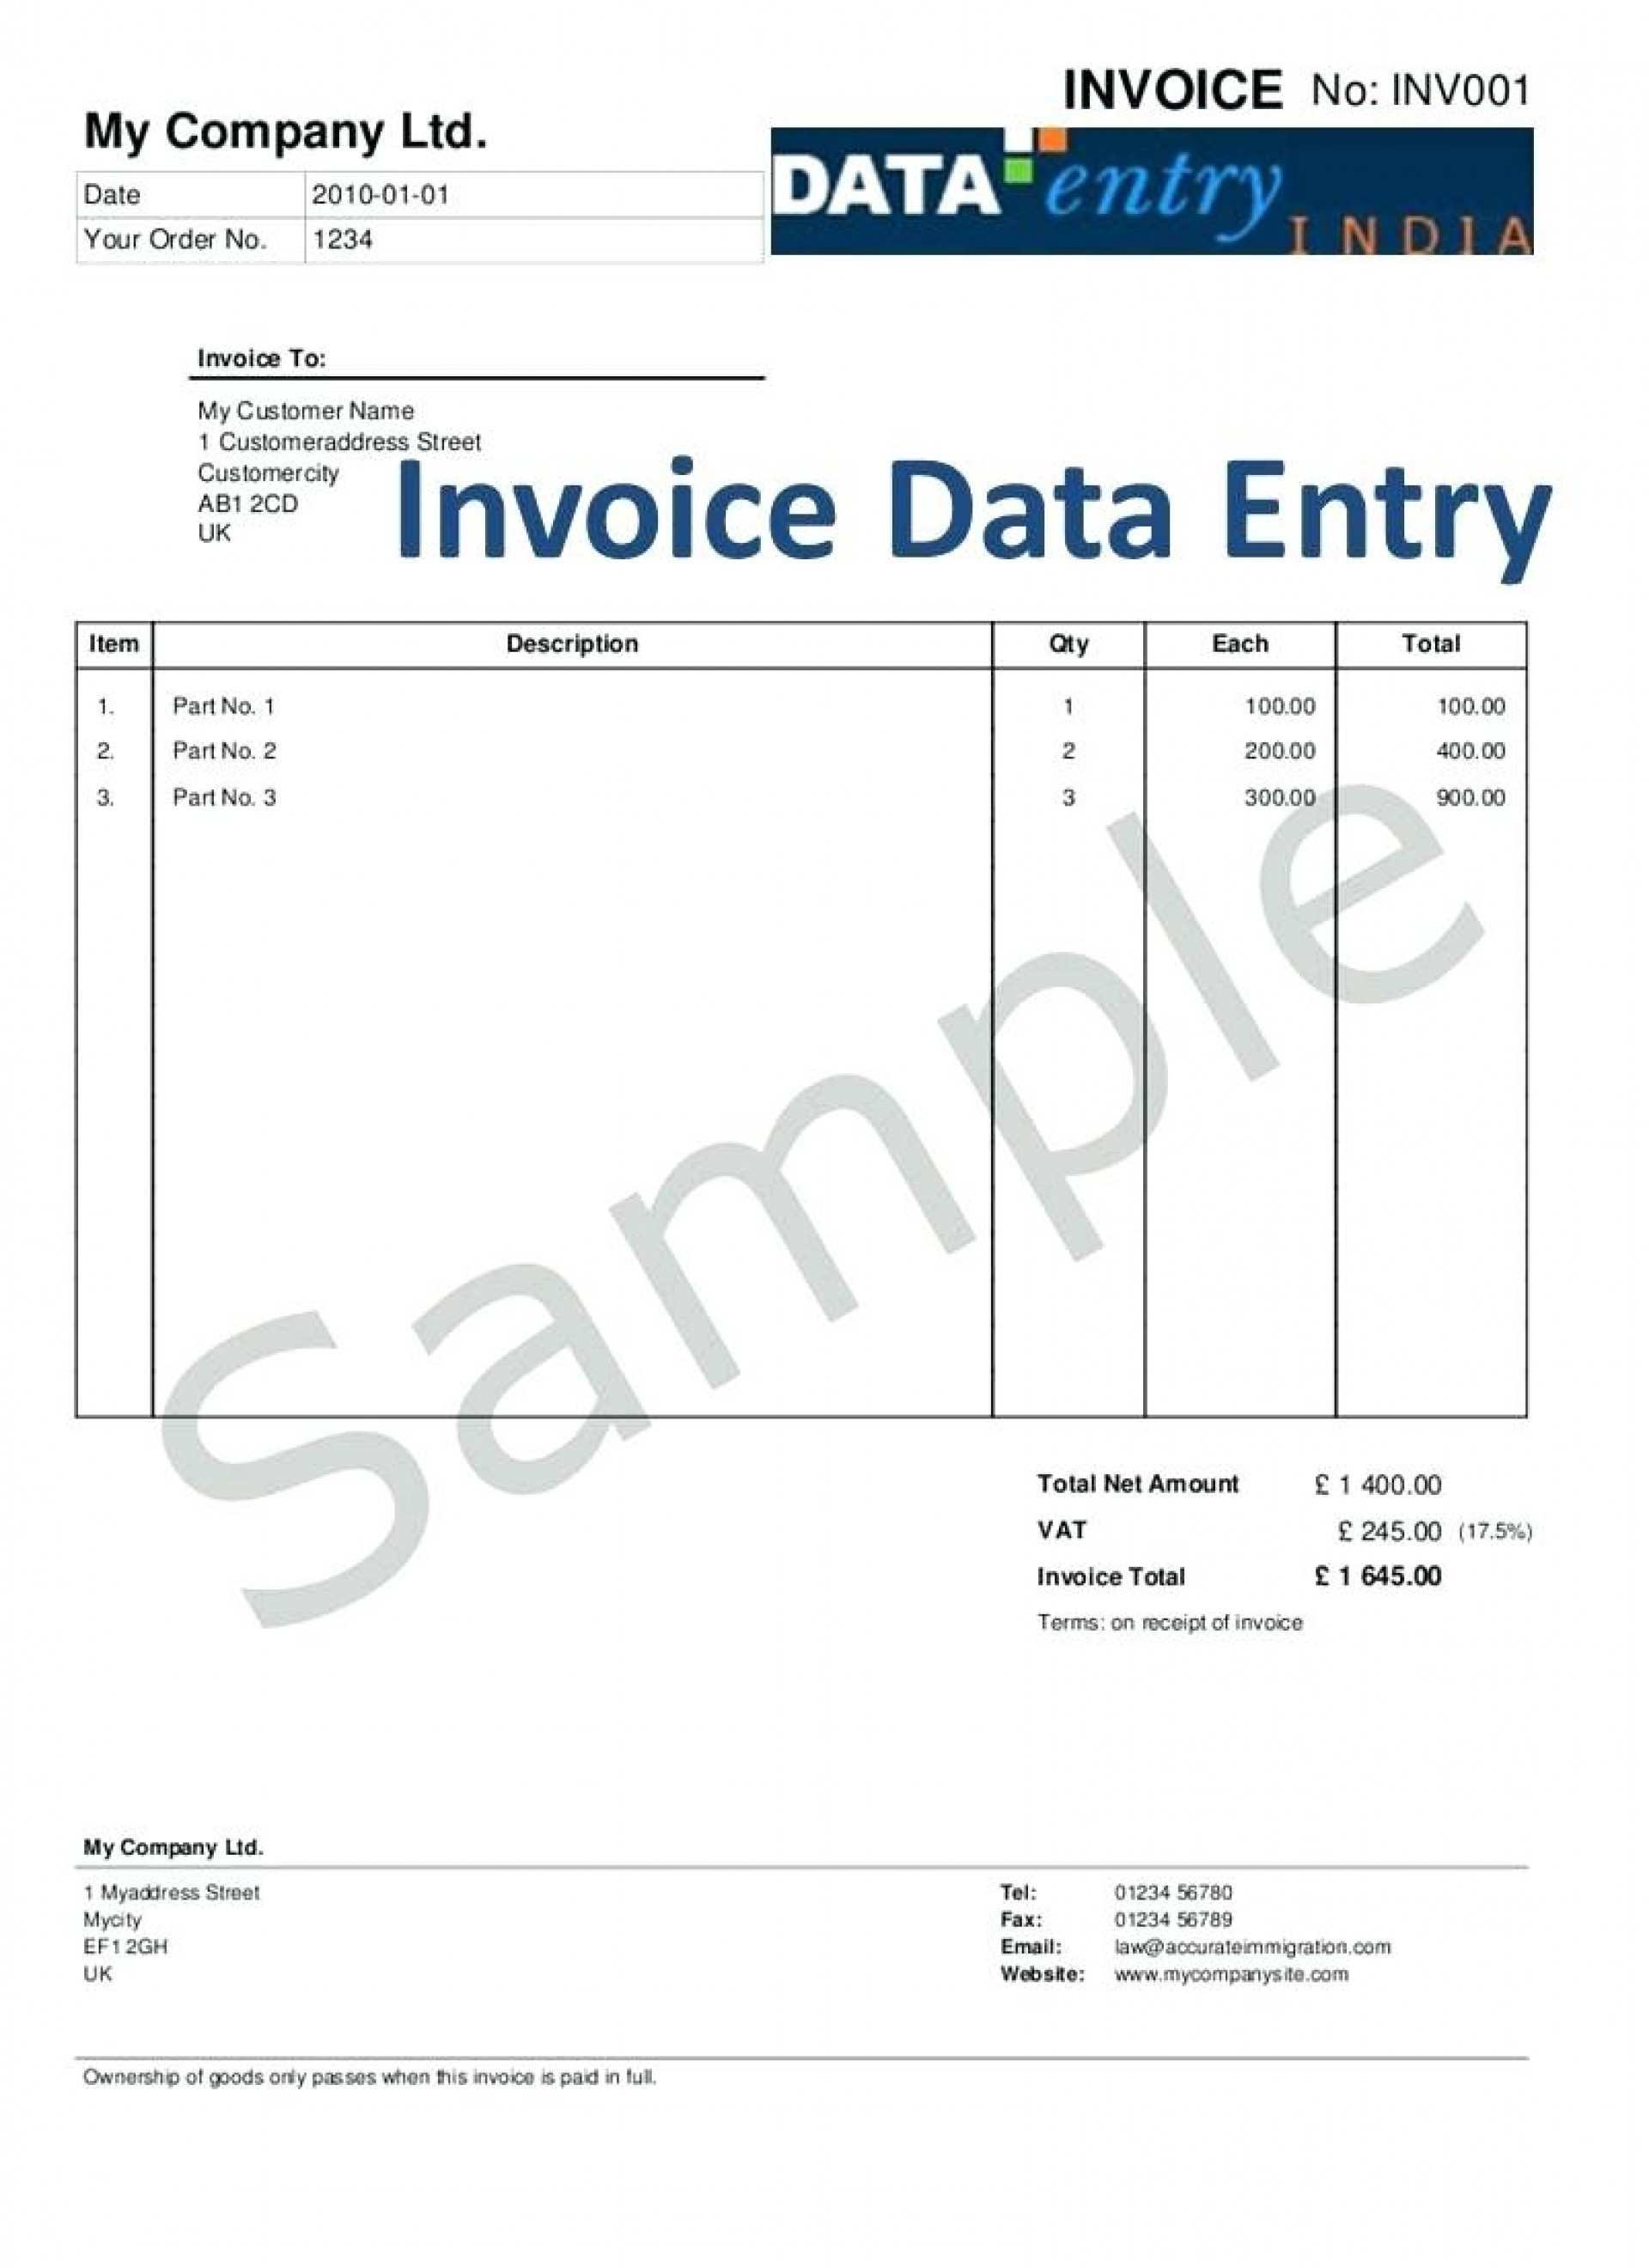 41 Online Tax Invoice Template Word South Africa Formating by Tax Invoice Template Word South Africa